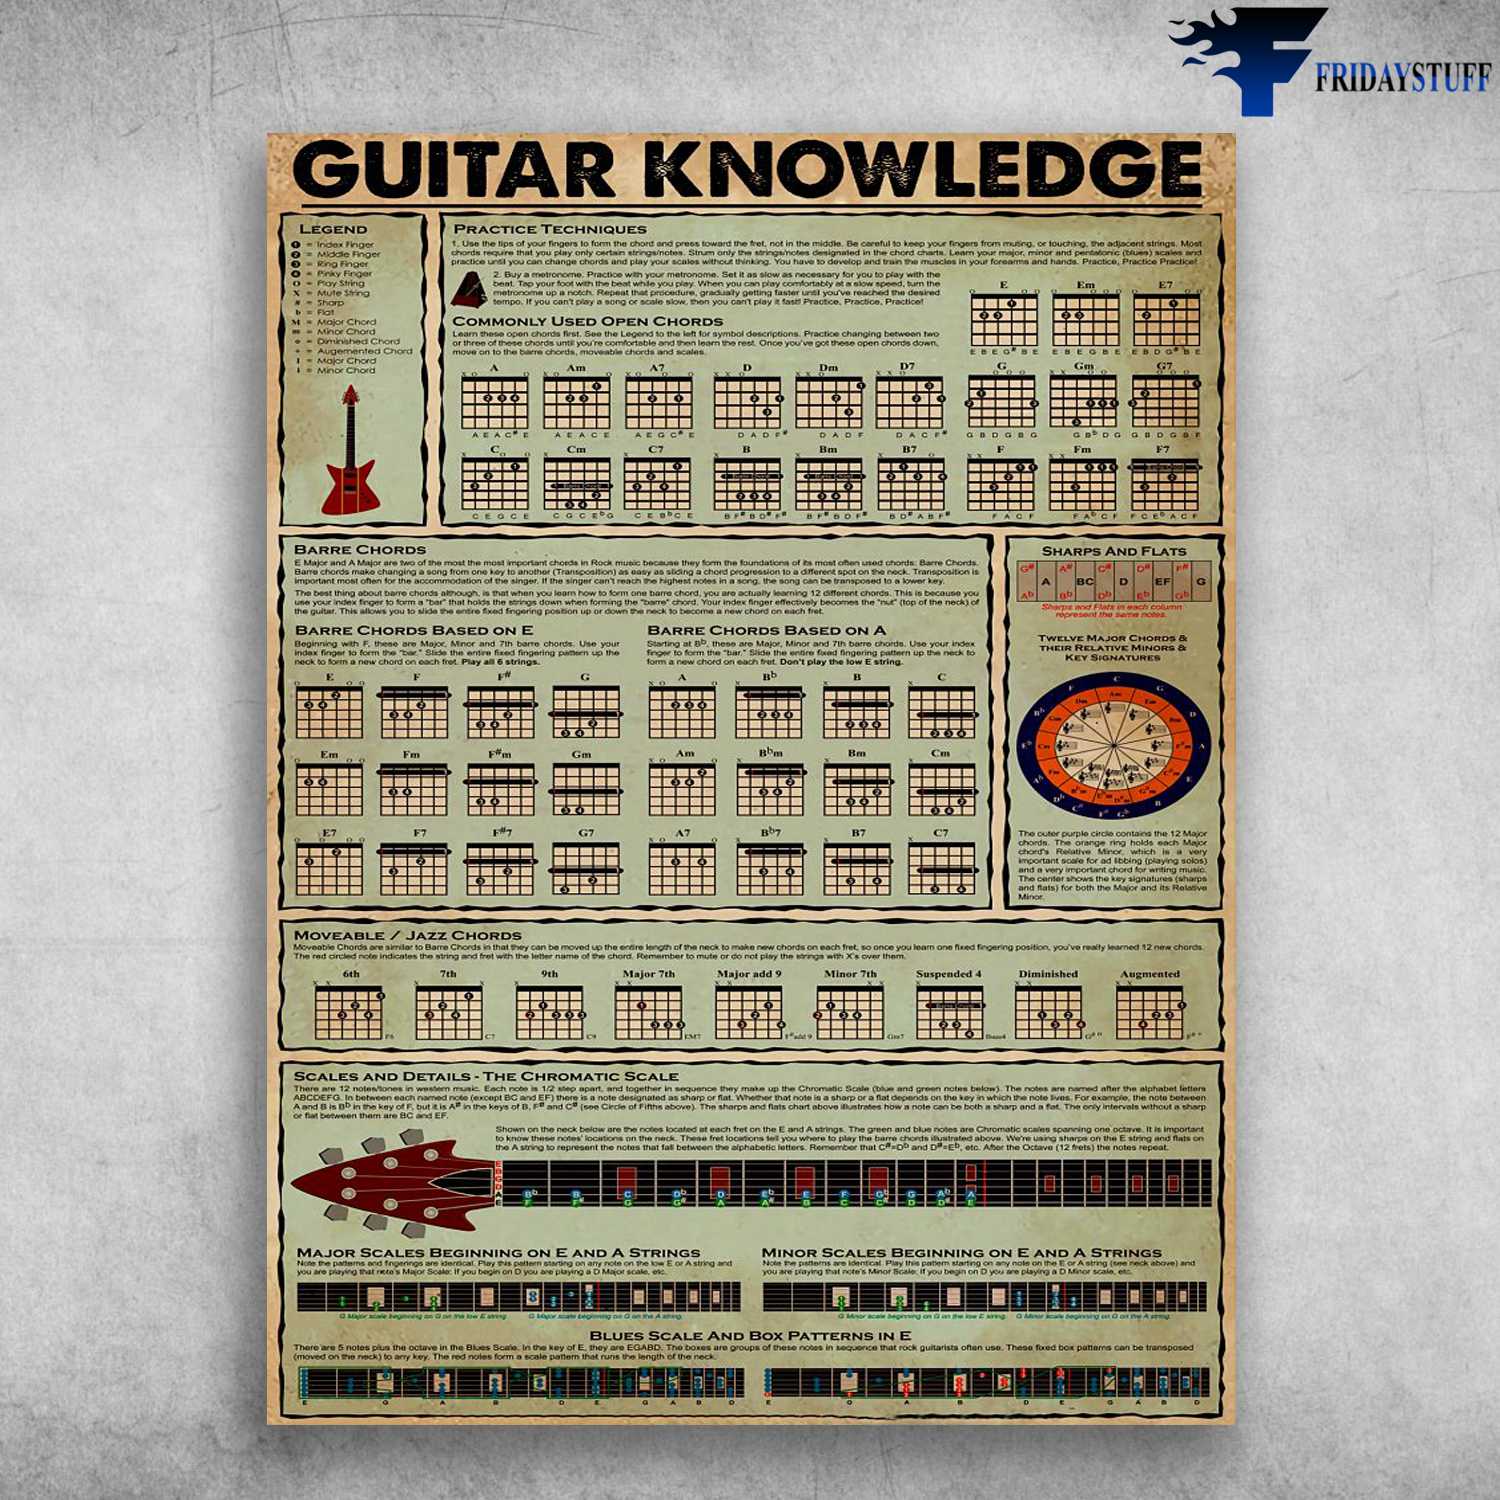 Guitar Knowledge, Guitar Lover, Practice Techniques, Commonly Used Open Chords